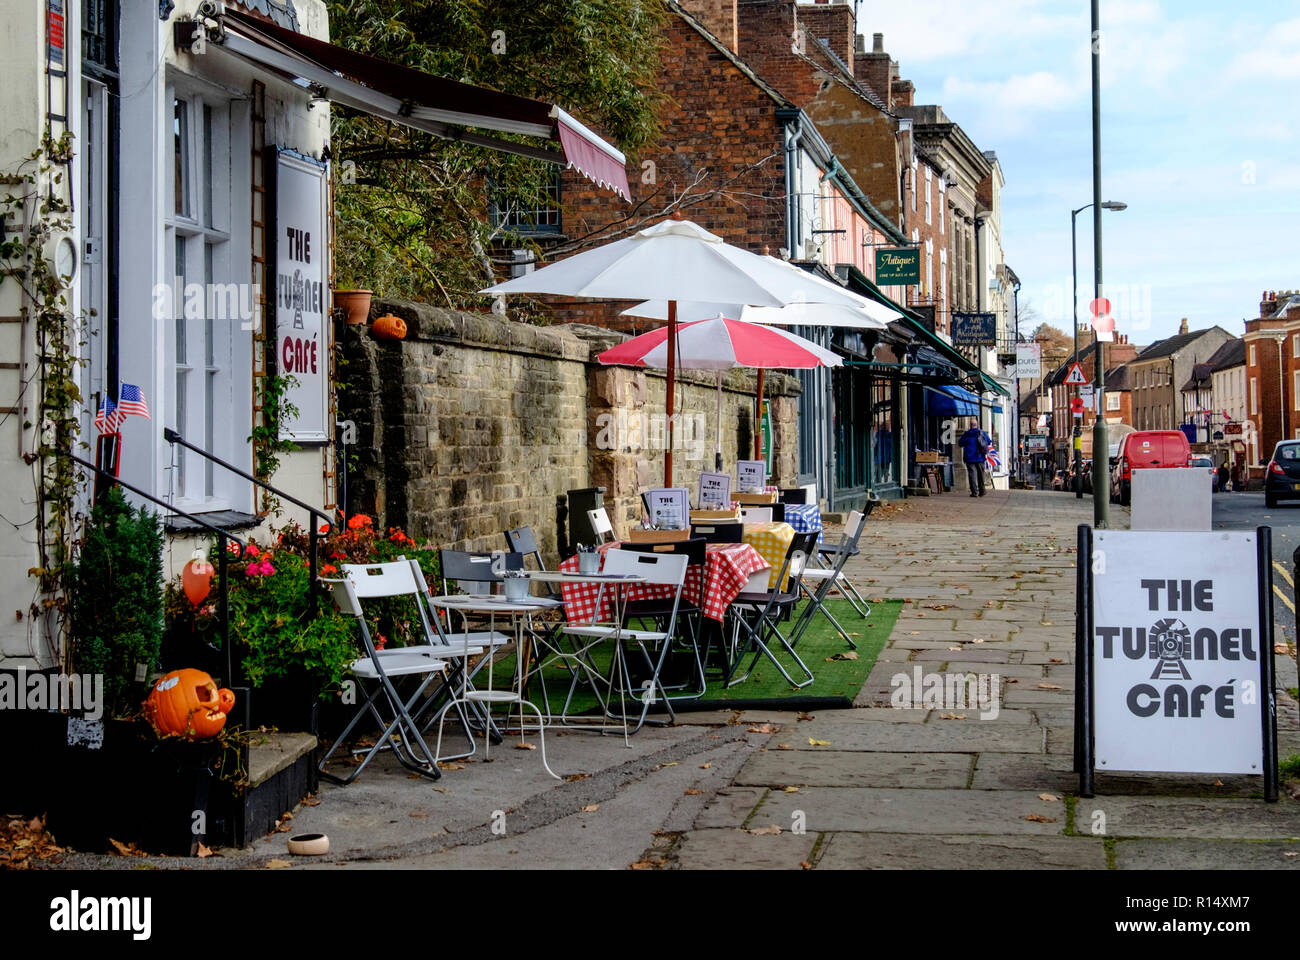 Ashbourne, a small town in the Derbyshire Dales, England UK  The Tunnel Cafe Stock Photo